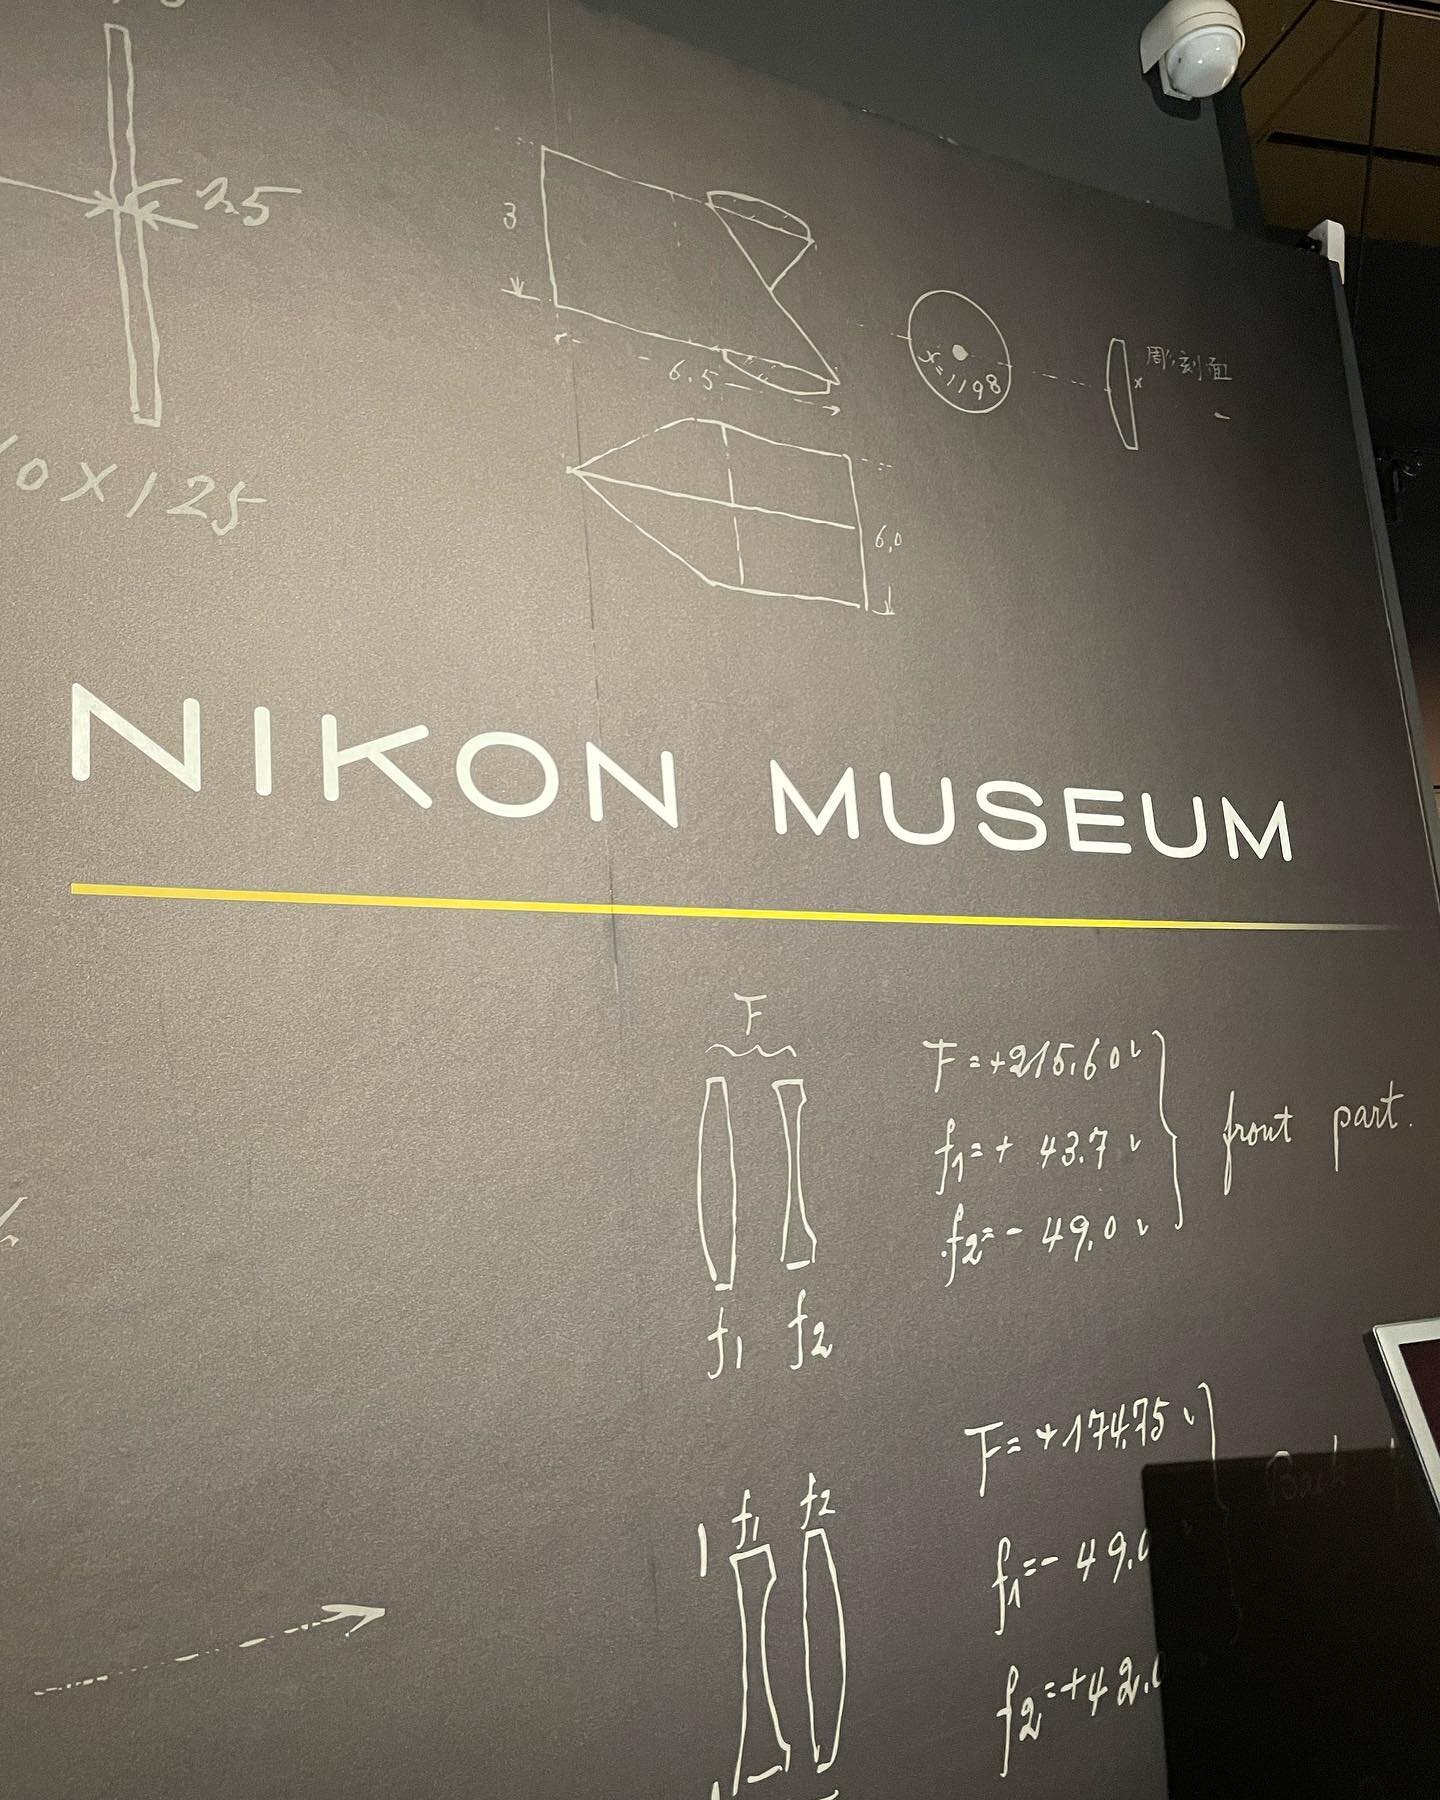 The travels continue!

After trying several times, I was finally able to make it to the #nikonmuseum !

As a lifelong #nikon user, seeing the history of the #camera and #optical company was a blast! 

If you ever find yourself in #shinagawa #japan an